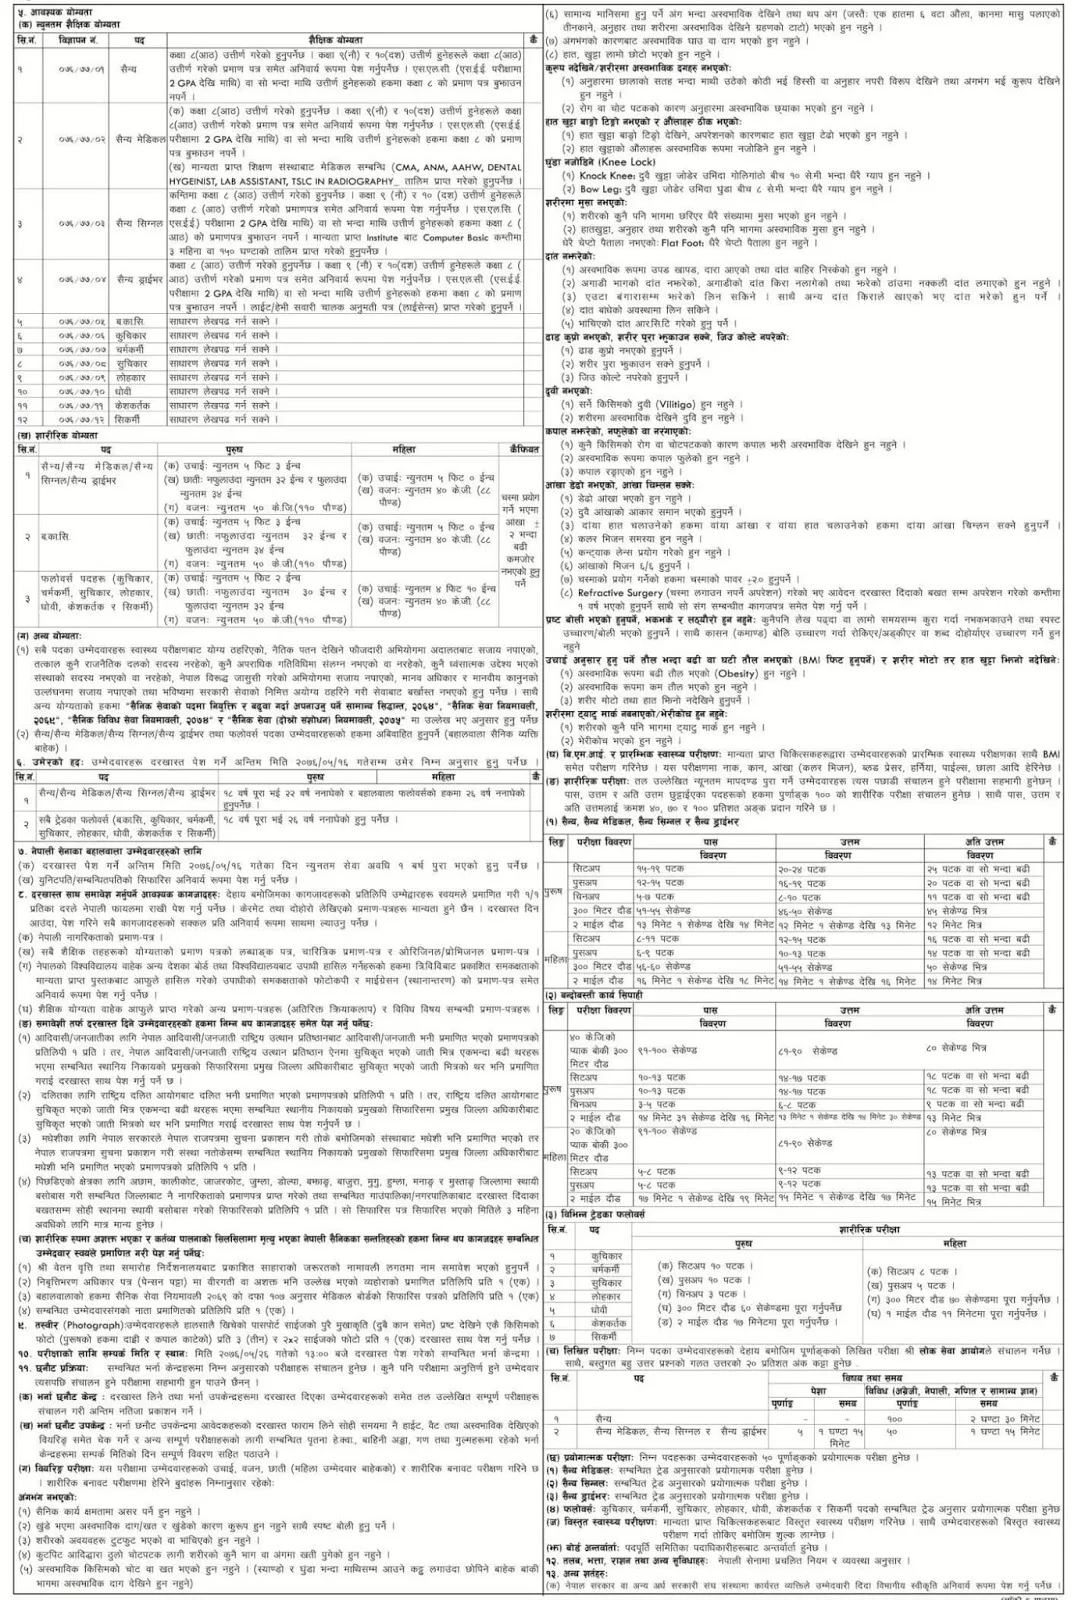 Nepal Army Vacancy for Various Positions 2